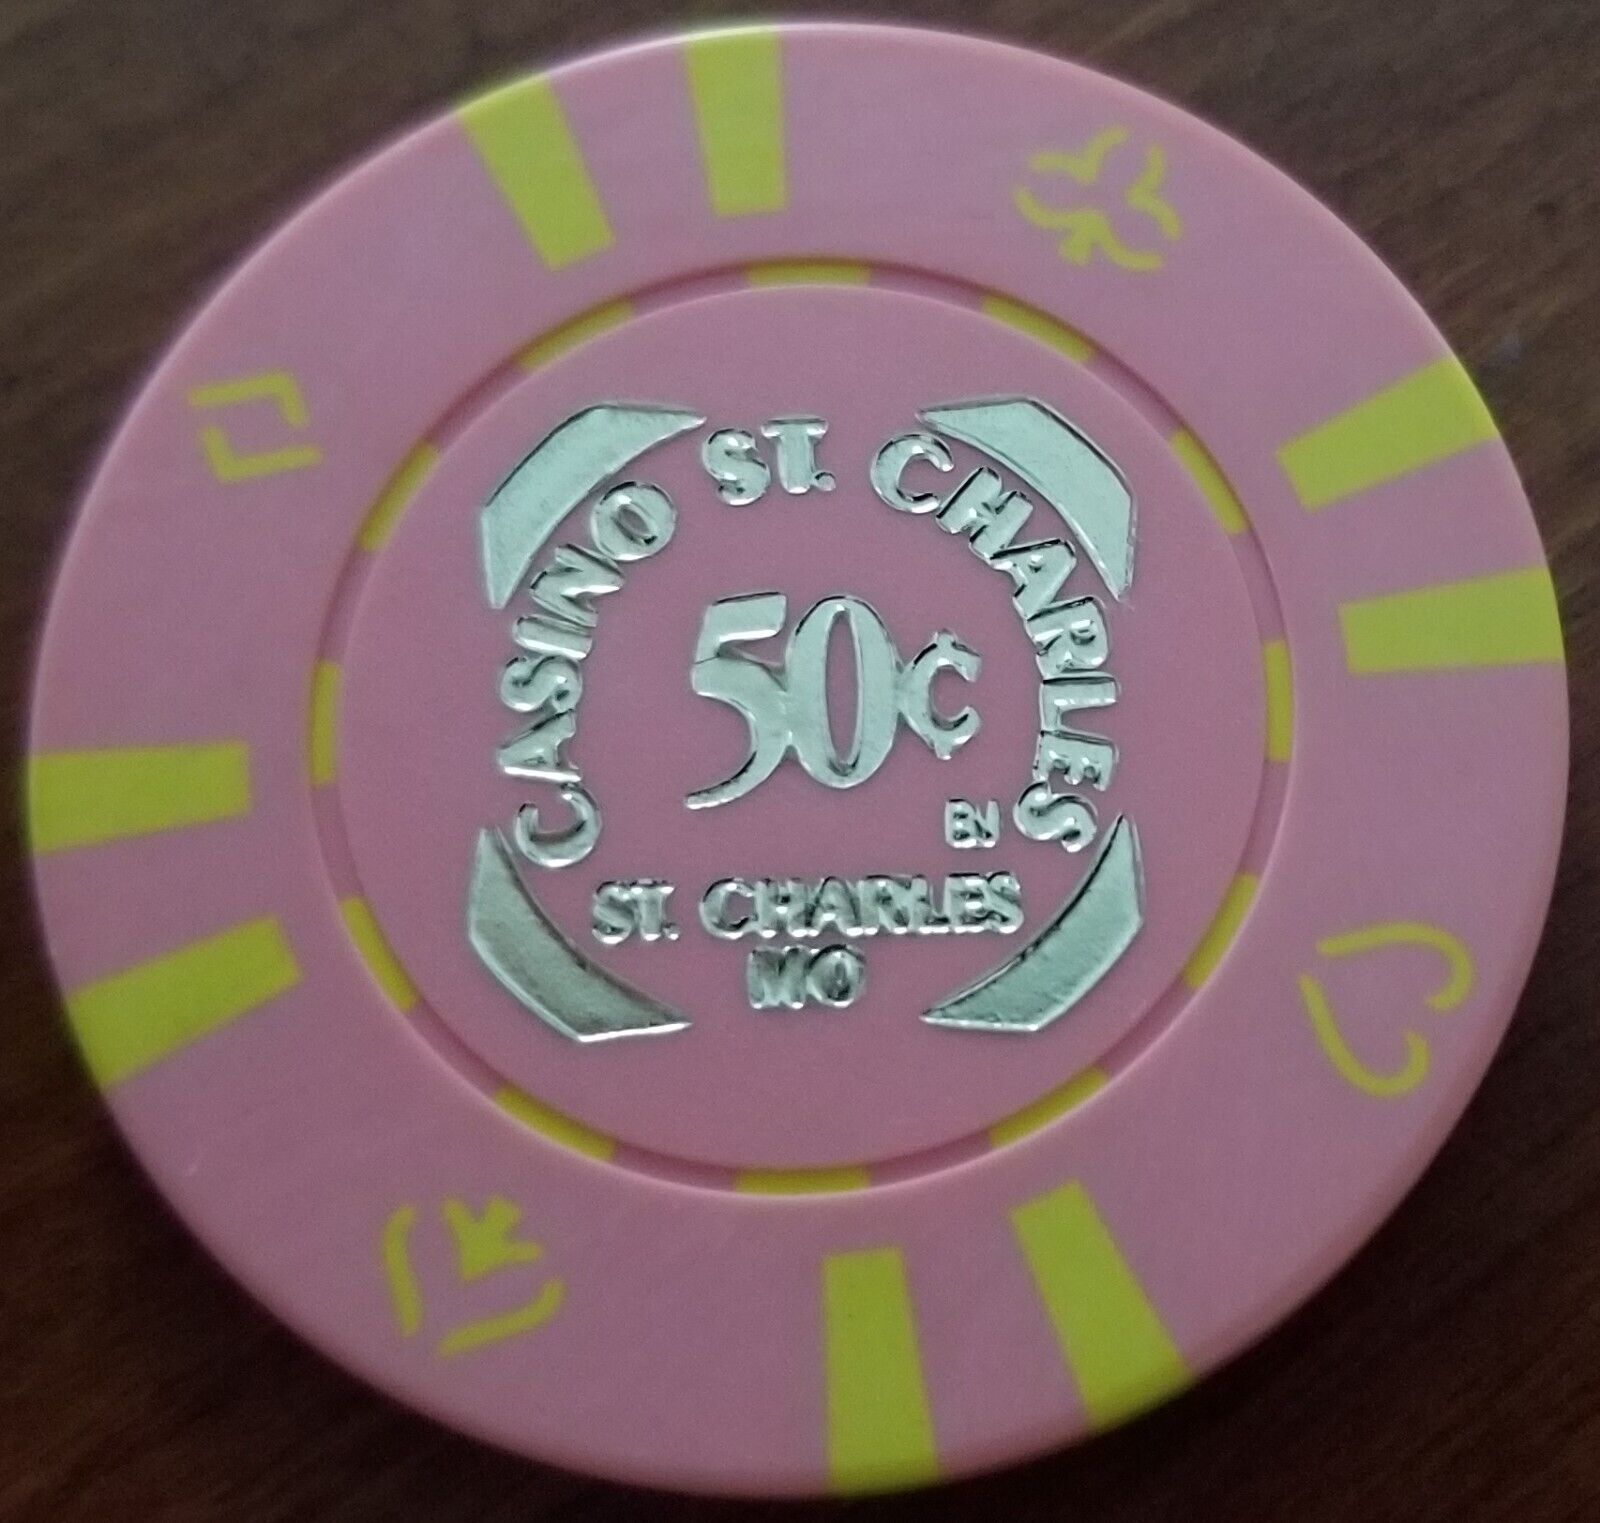 50 cent Chip from the Casino St. Charles in St. Charles, MO